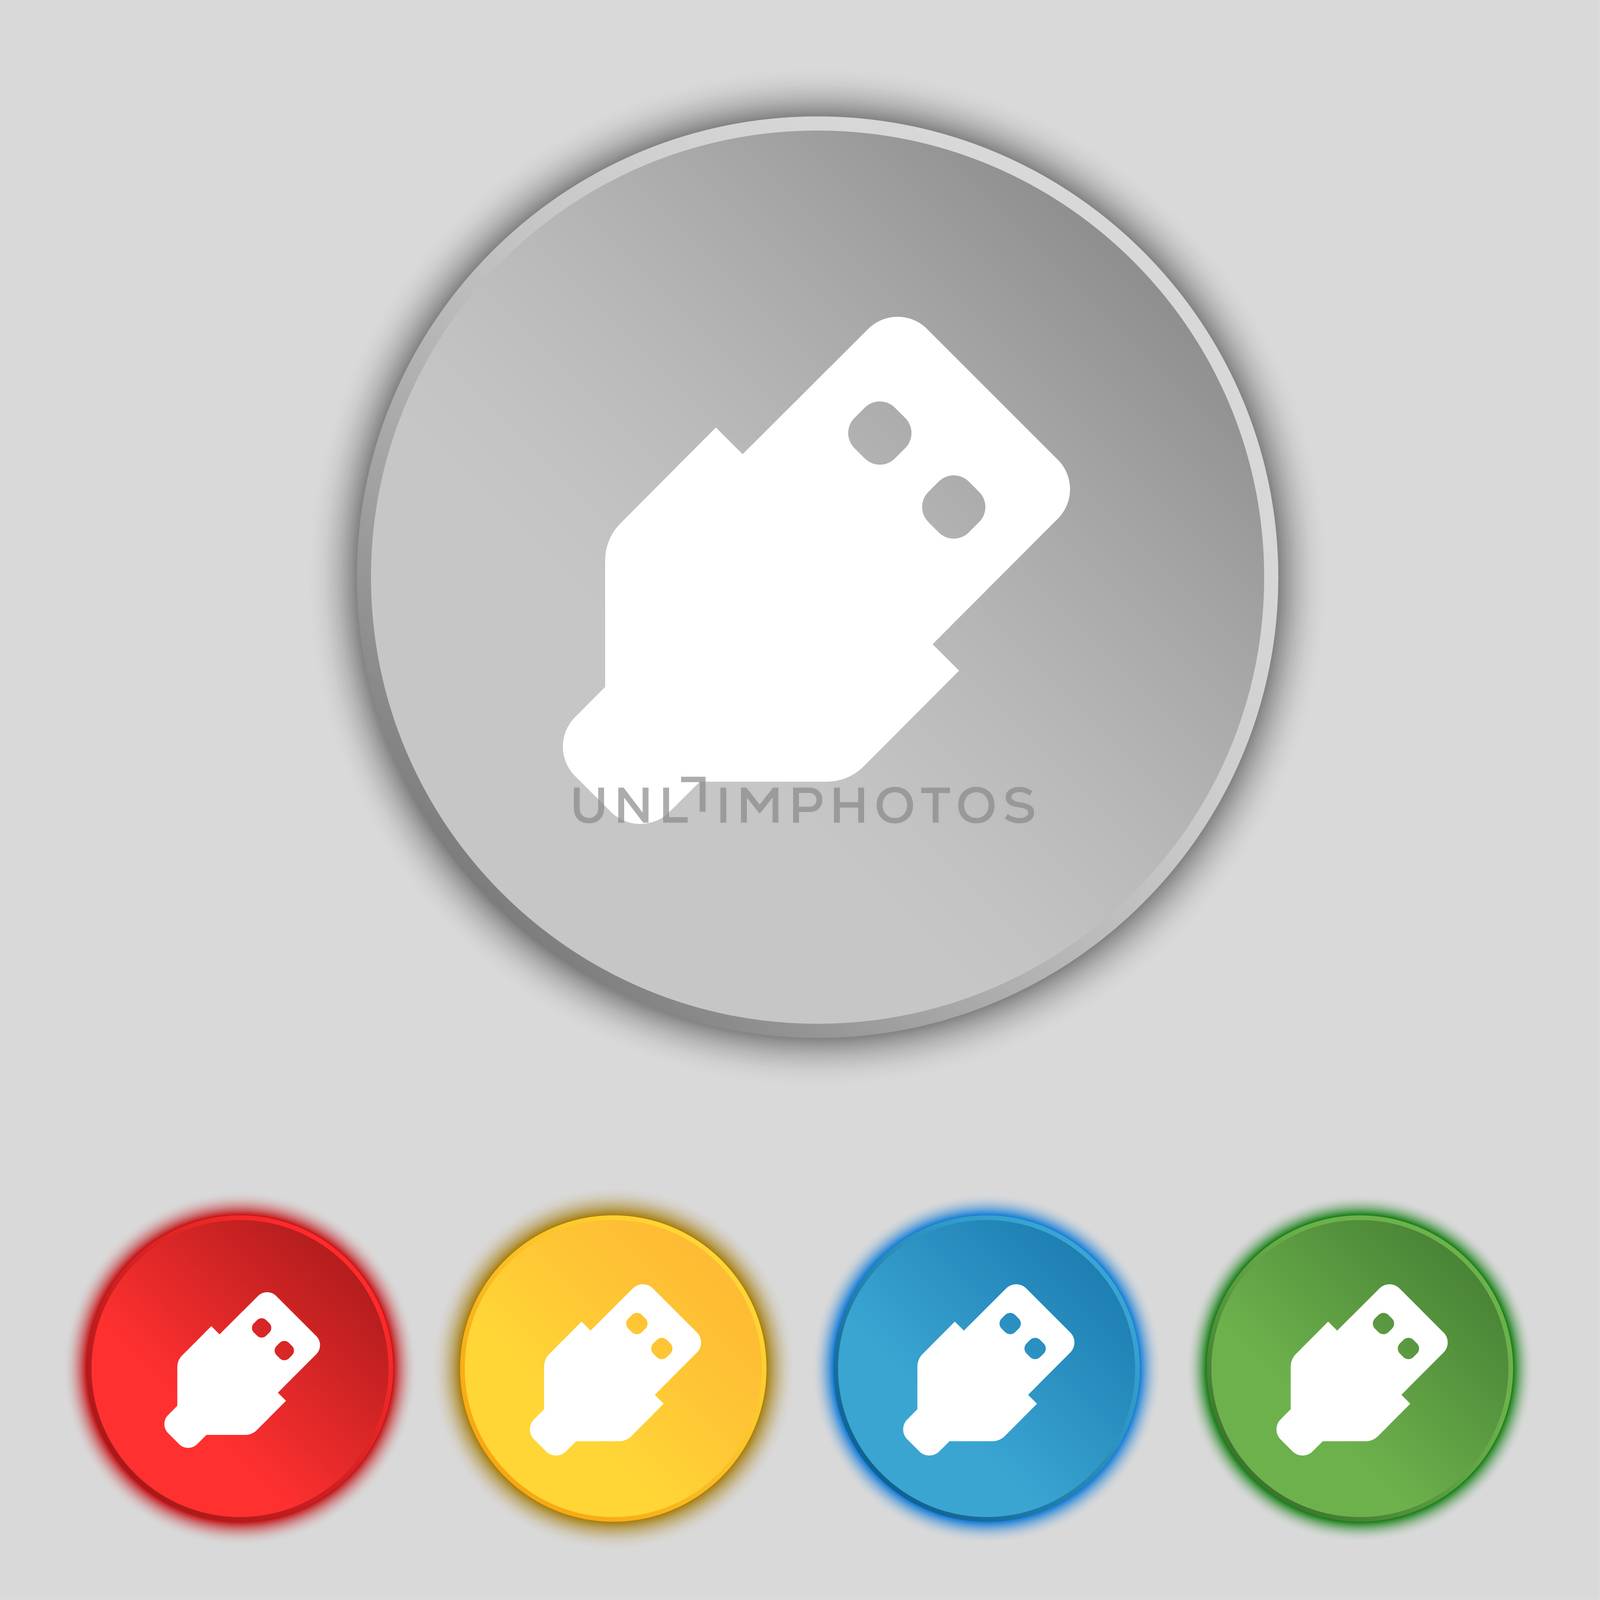 USB icon sign. Symbol on five flat buttons. illustration